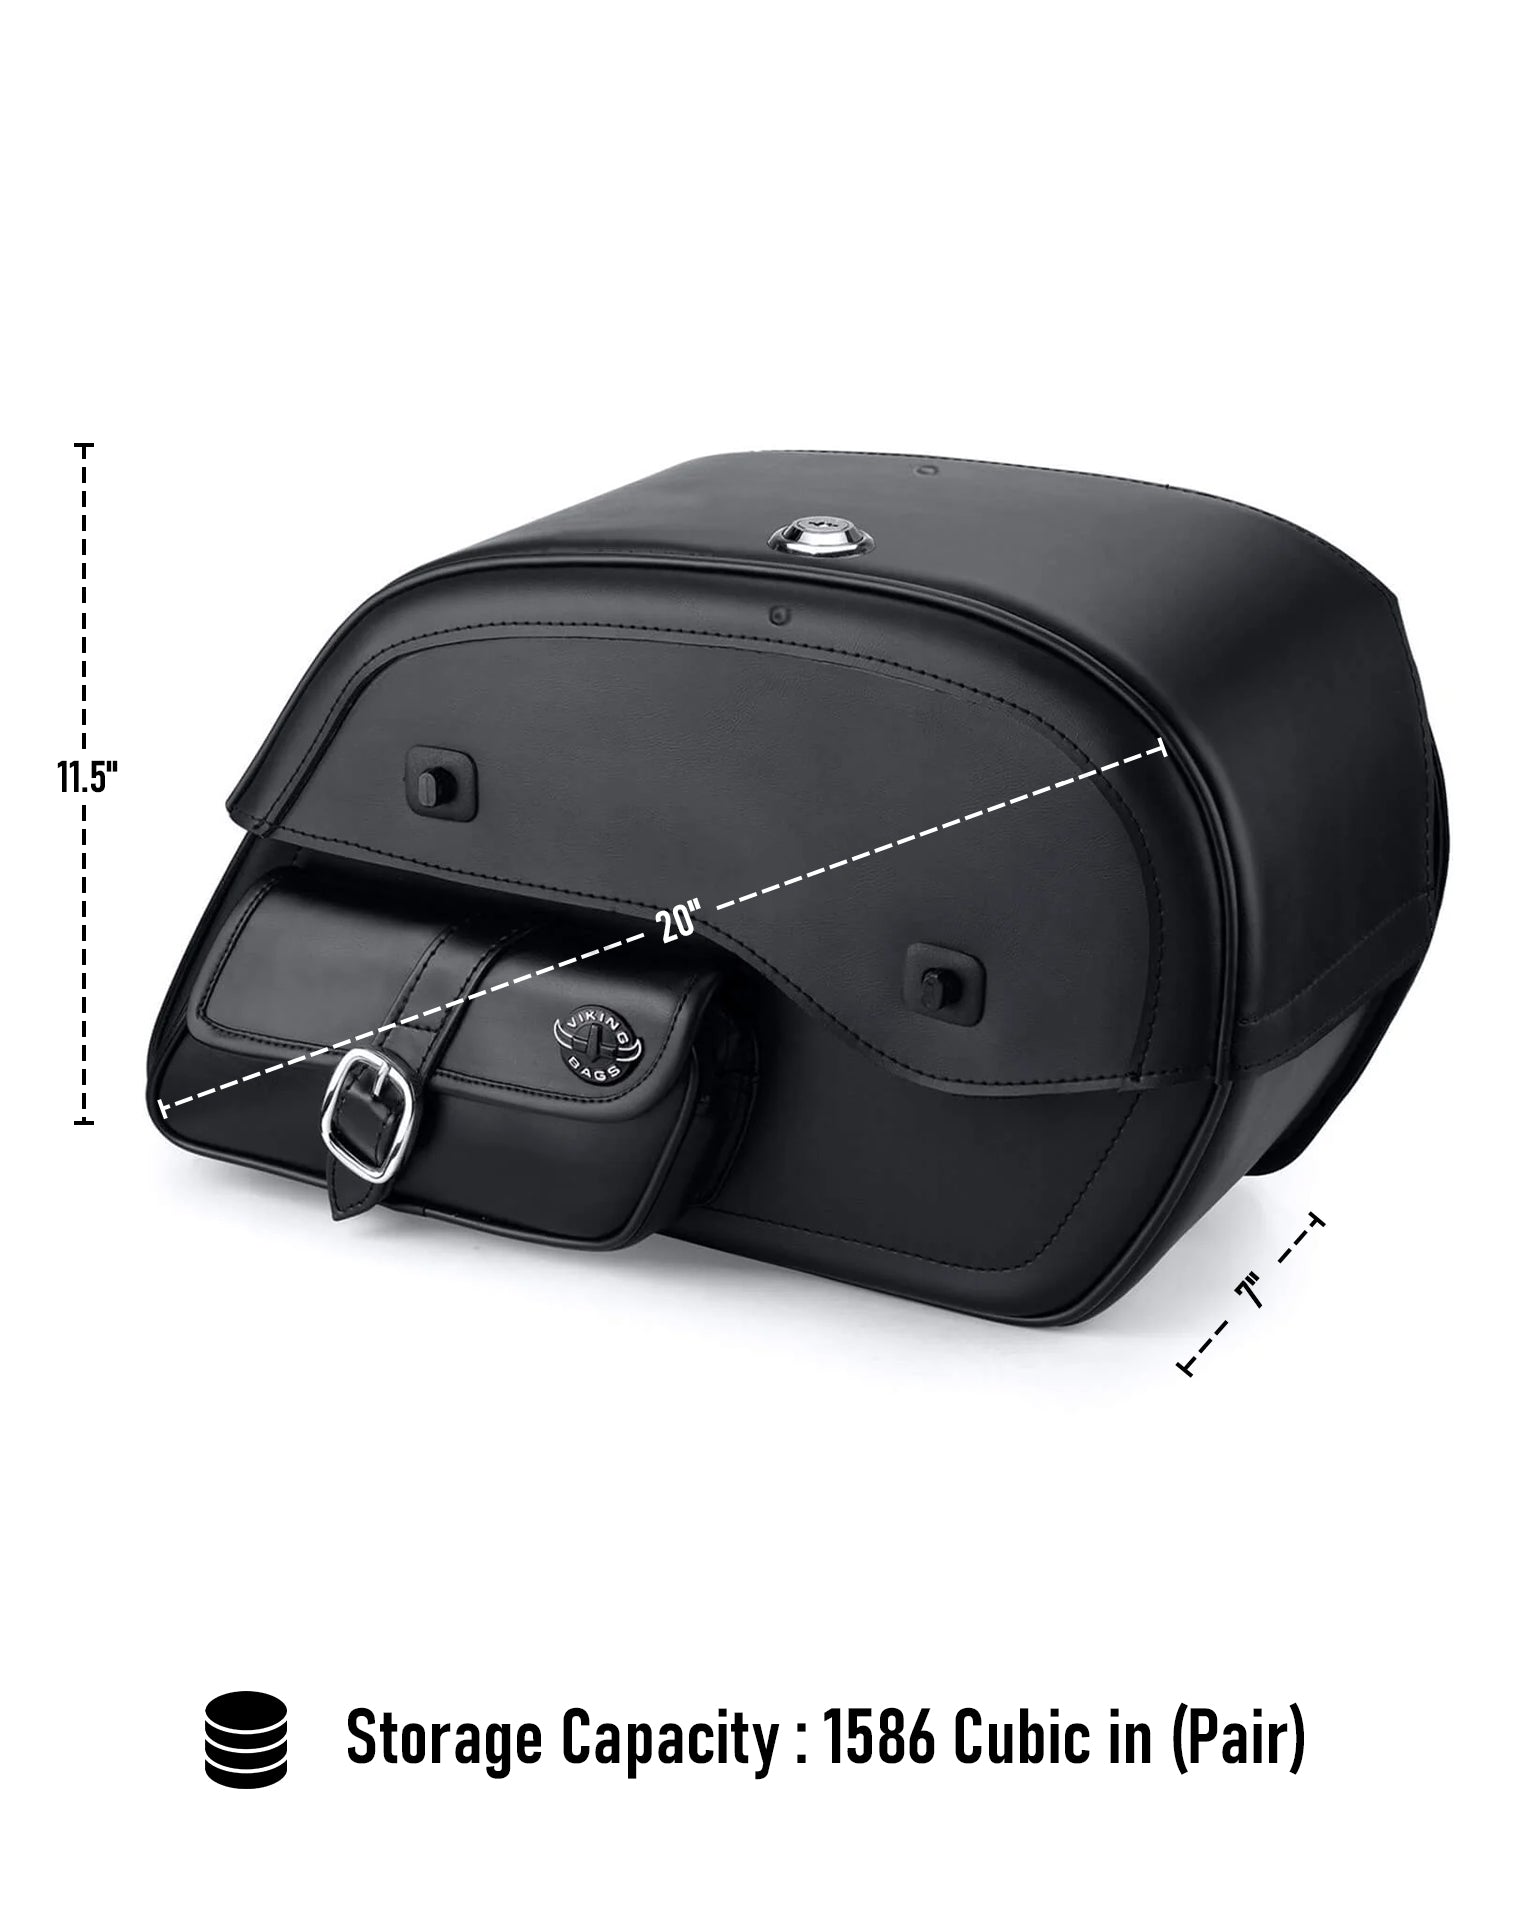 Viking Essential Side Pocket Large Honda Shadow 750 Rs Shock Cutout Leather Motorcycle Saddlebags Can Store Your Ridings Gears